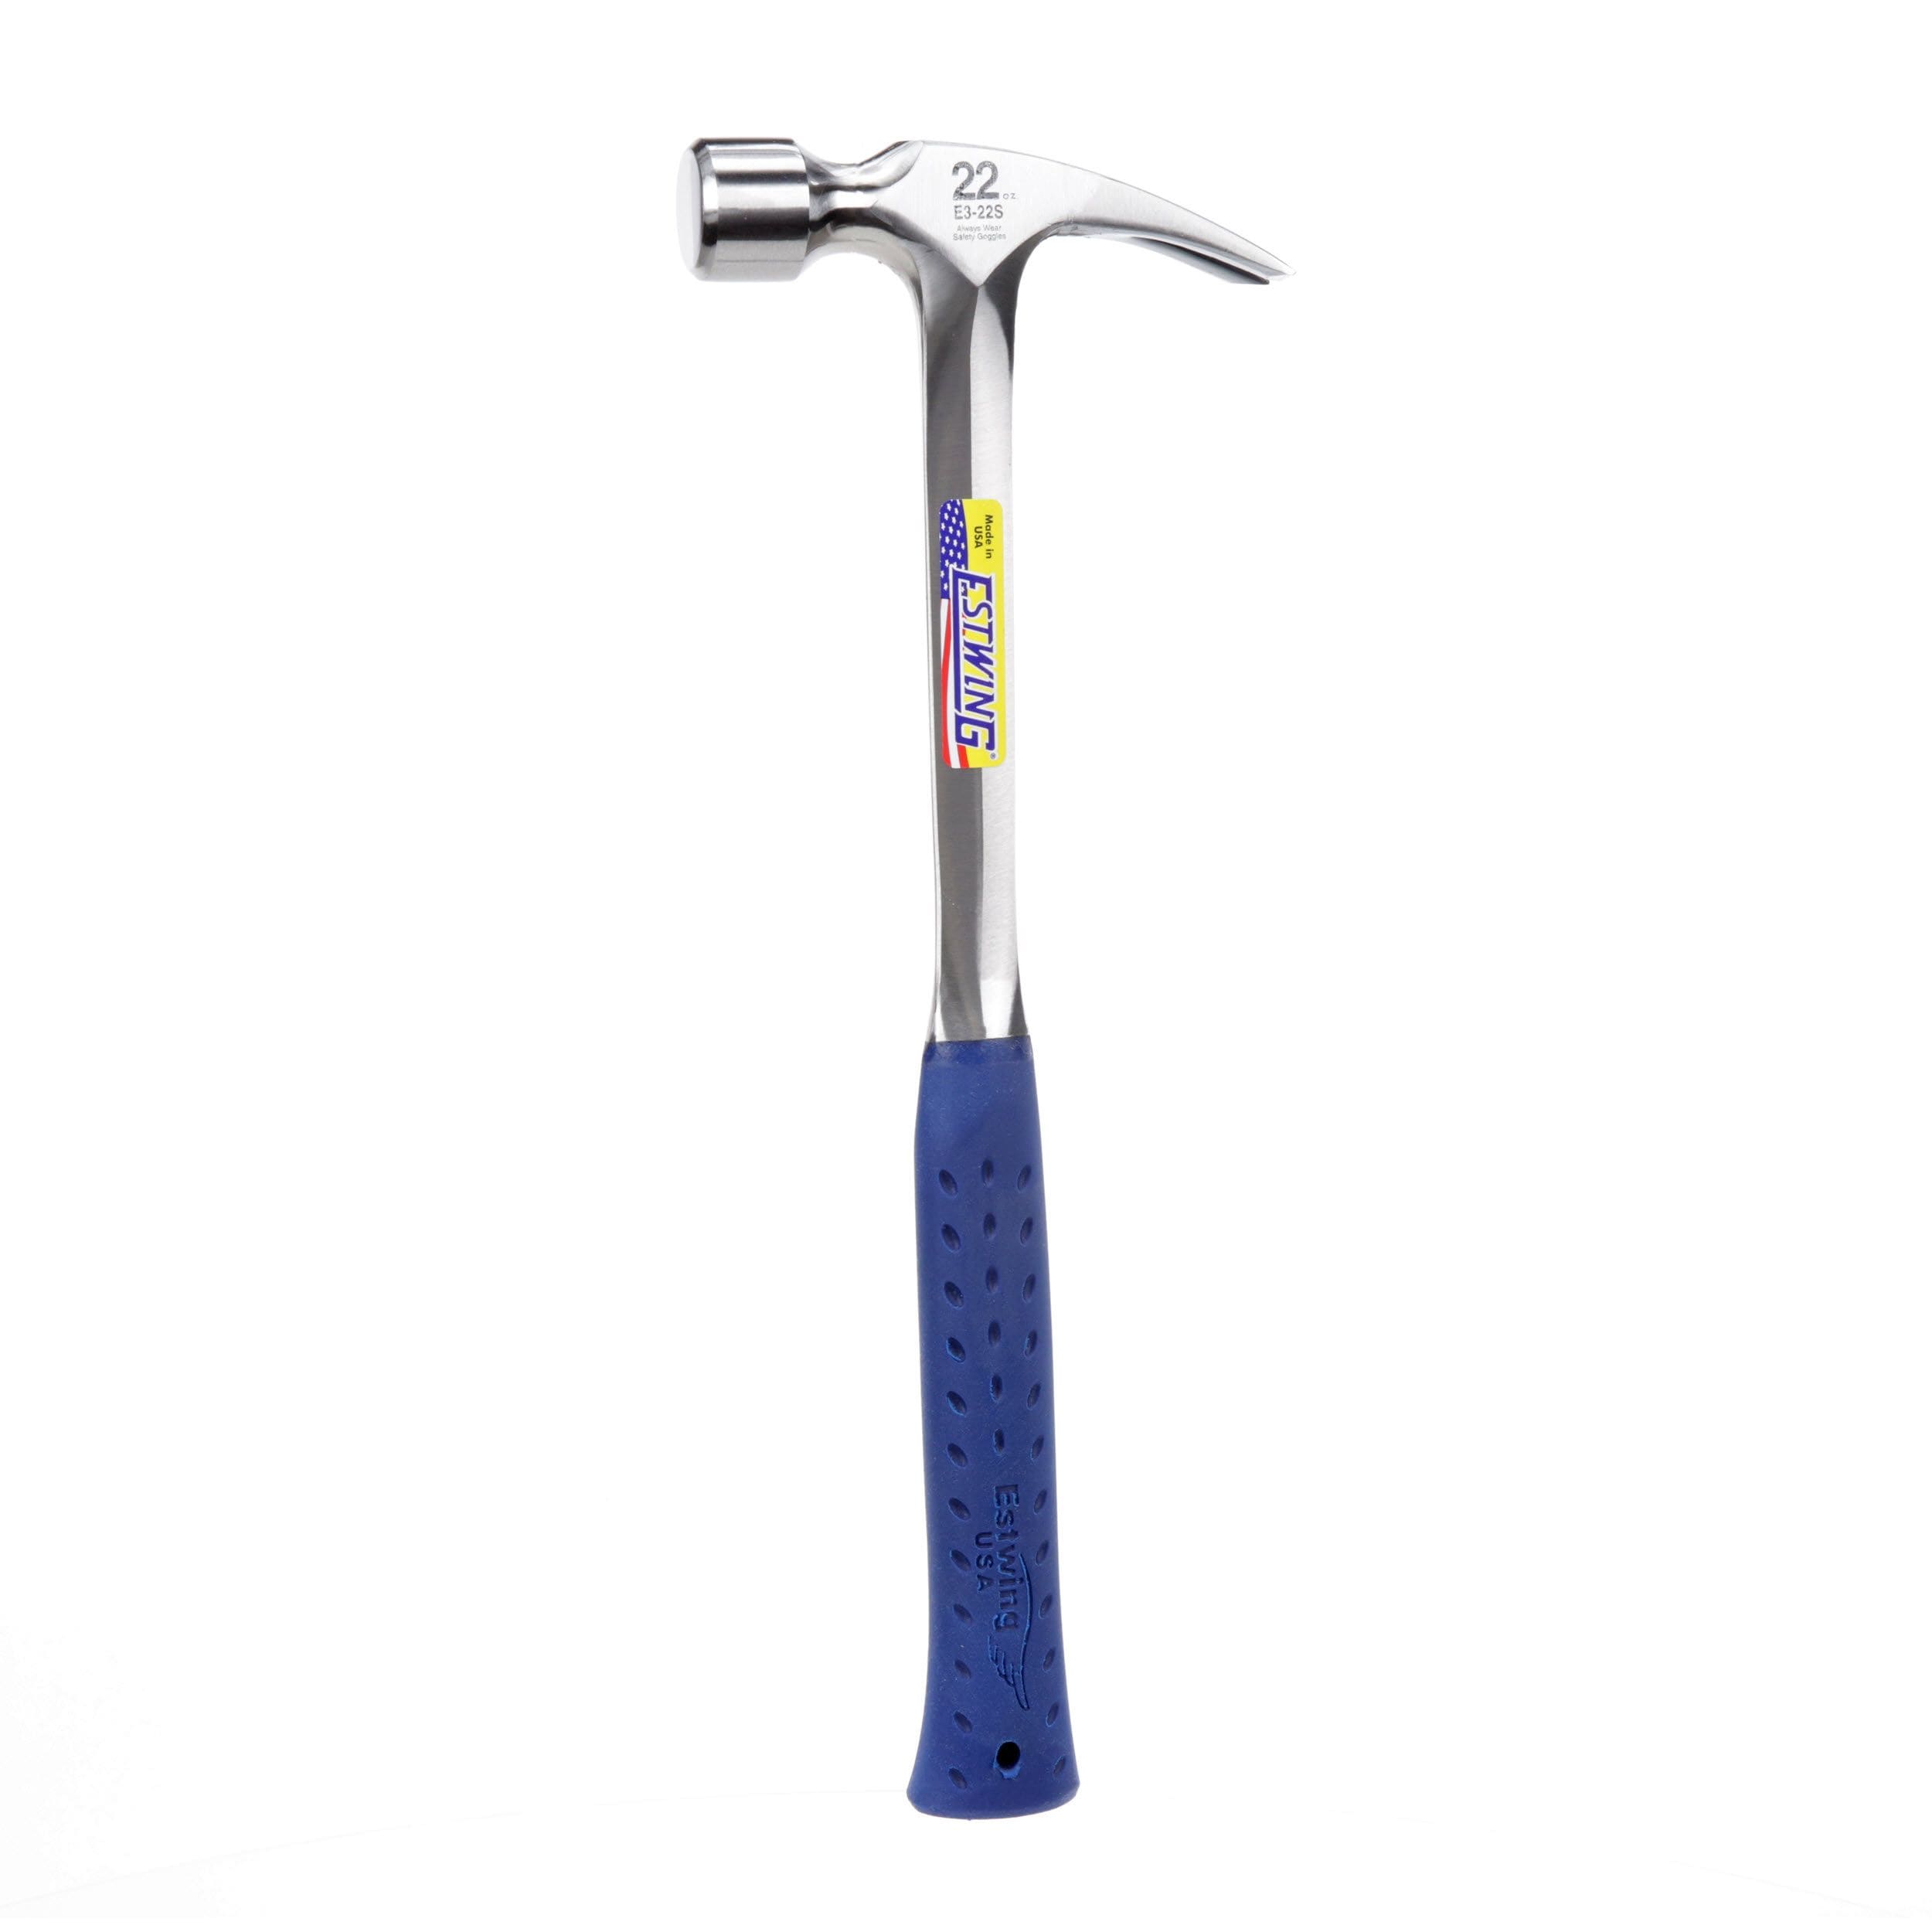 Details about   Estwing 22oz Fibreglass Sure Strike Framing Hammer Forged Steel Smooth Face 